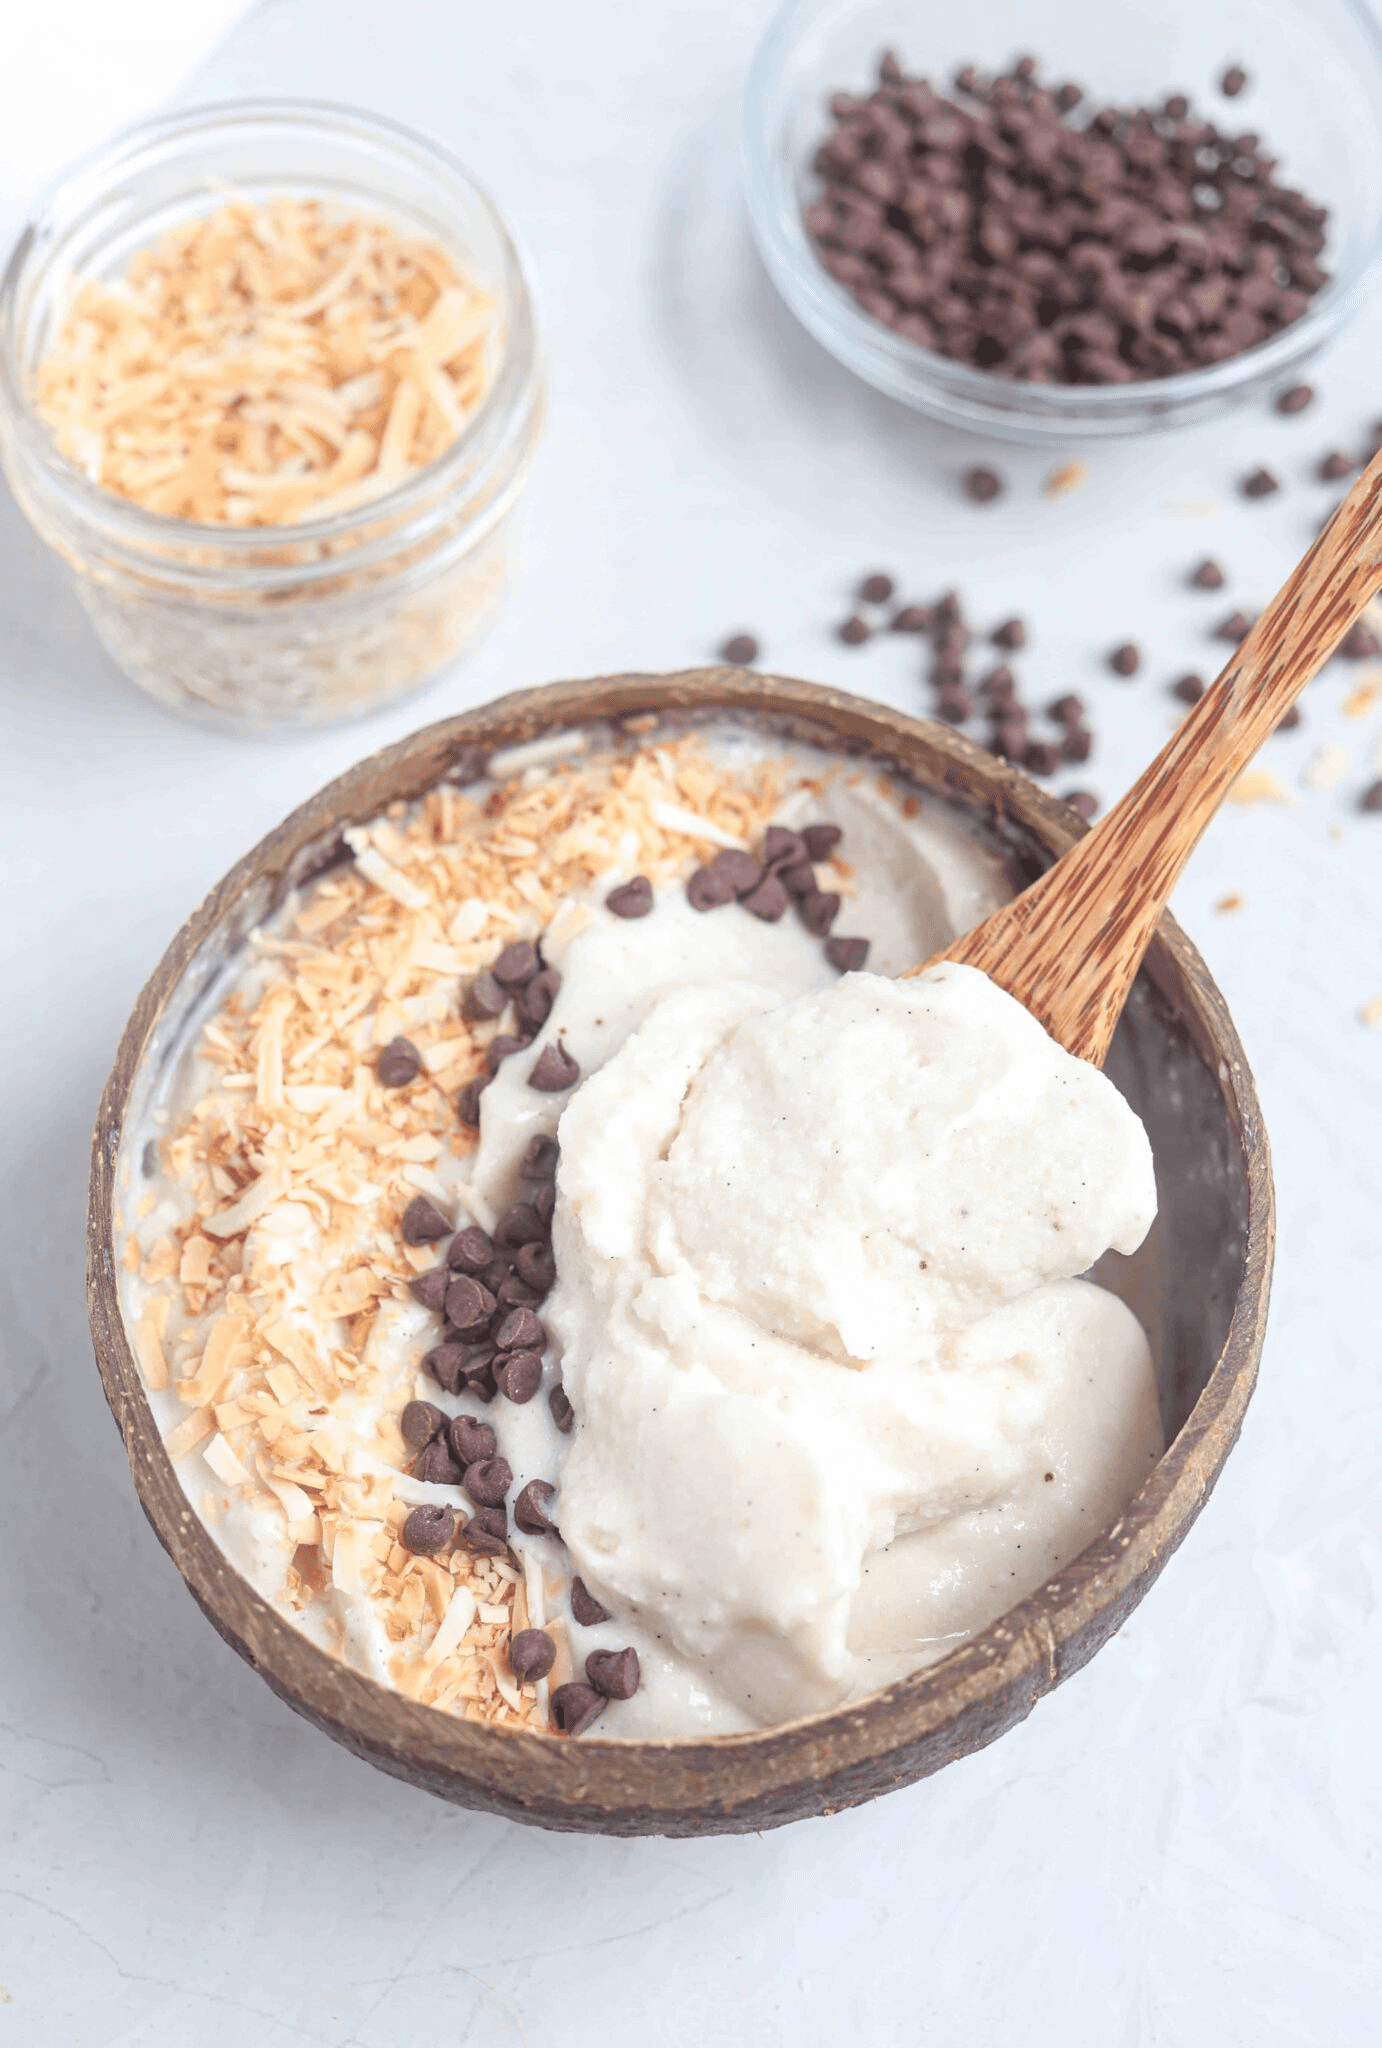 coconut vanilla smoothie bowl topped with toasted coconut and mini chocolate chips in a natural coconut shell, bite shot.